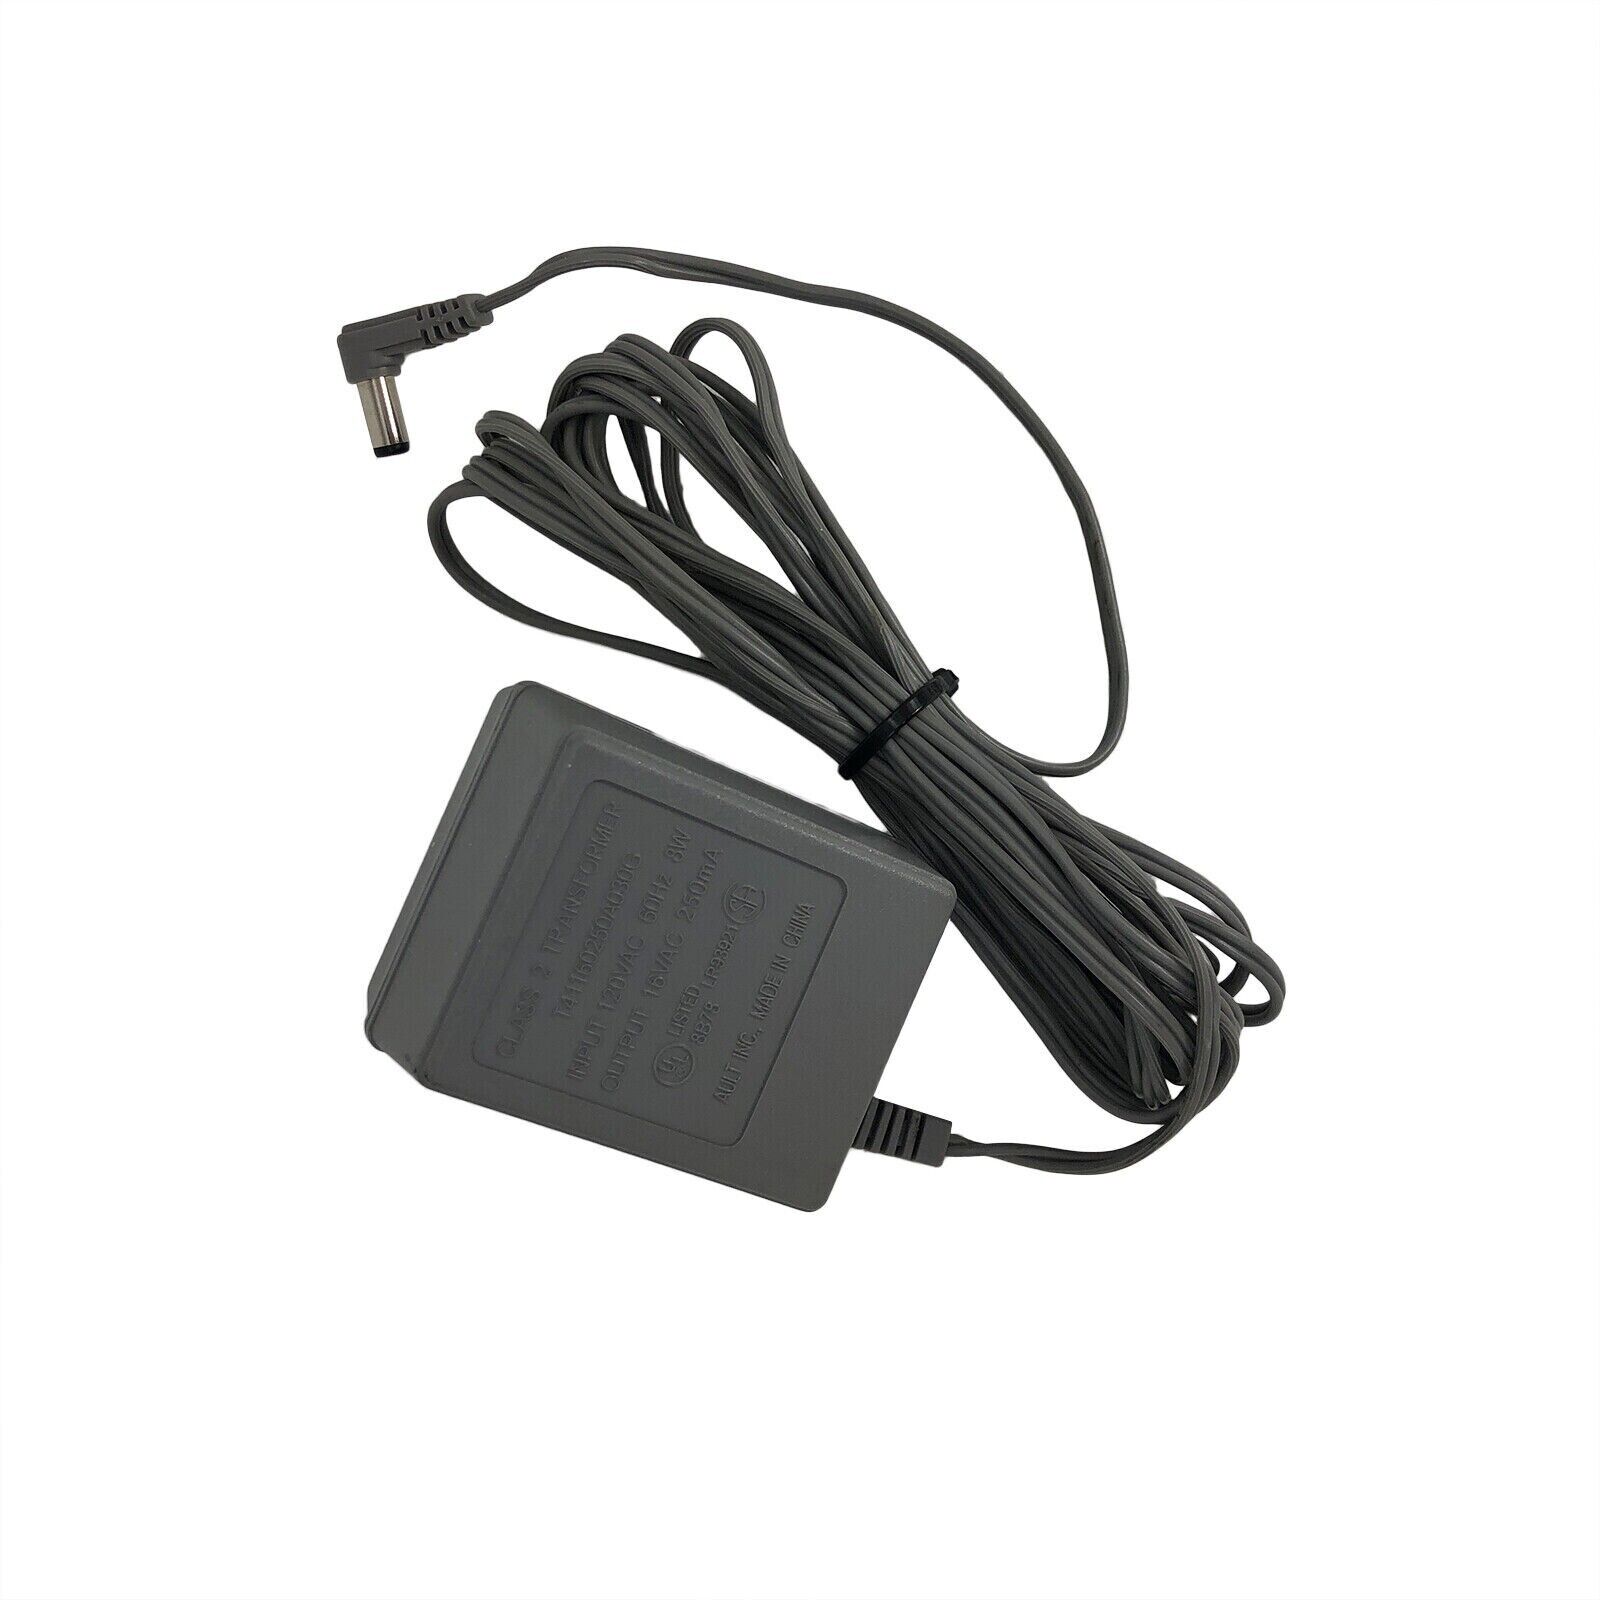 *Brand NEW*Genuine 16 V 250mA AC Adapter for Nortel Meridian Aastra 9417 M9417 9417CW M9417CW Phone POWER Supp - Click Image to Close